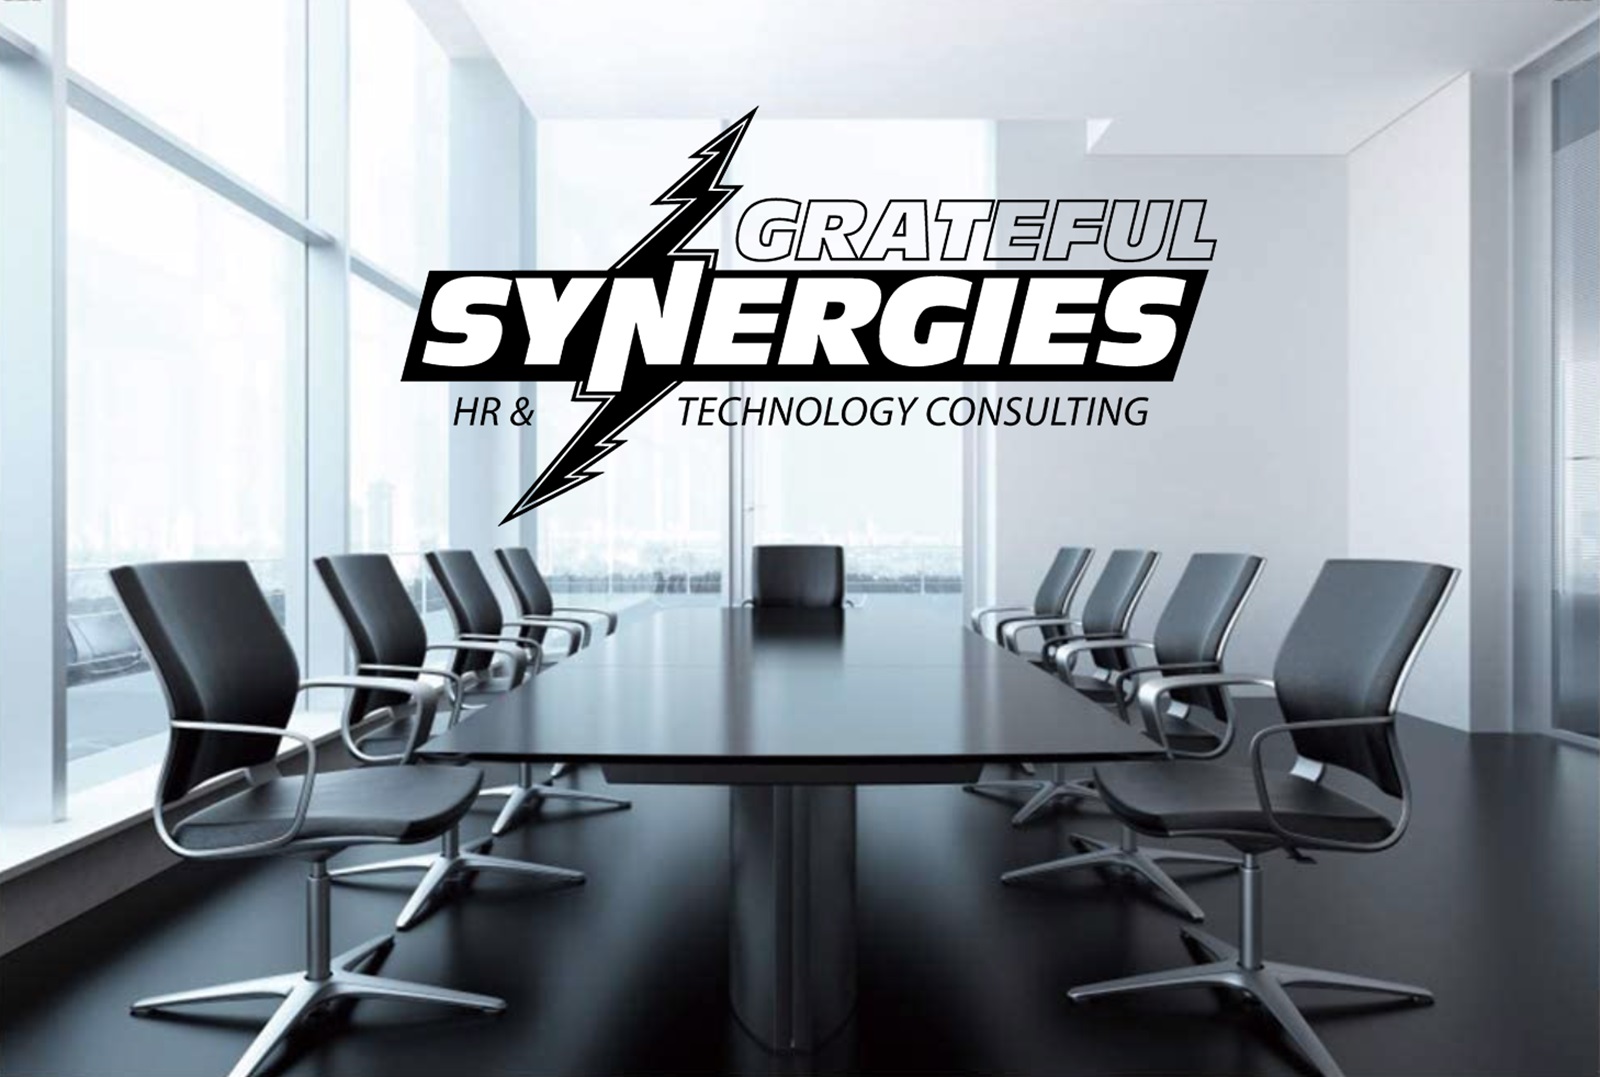 Grateful Synergies HR & Technology Consulting